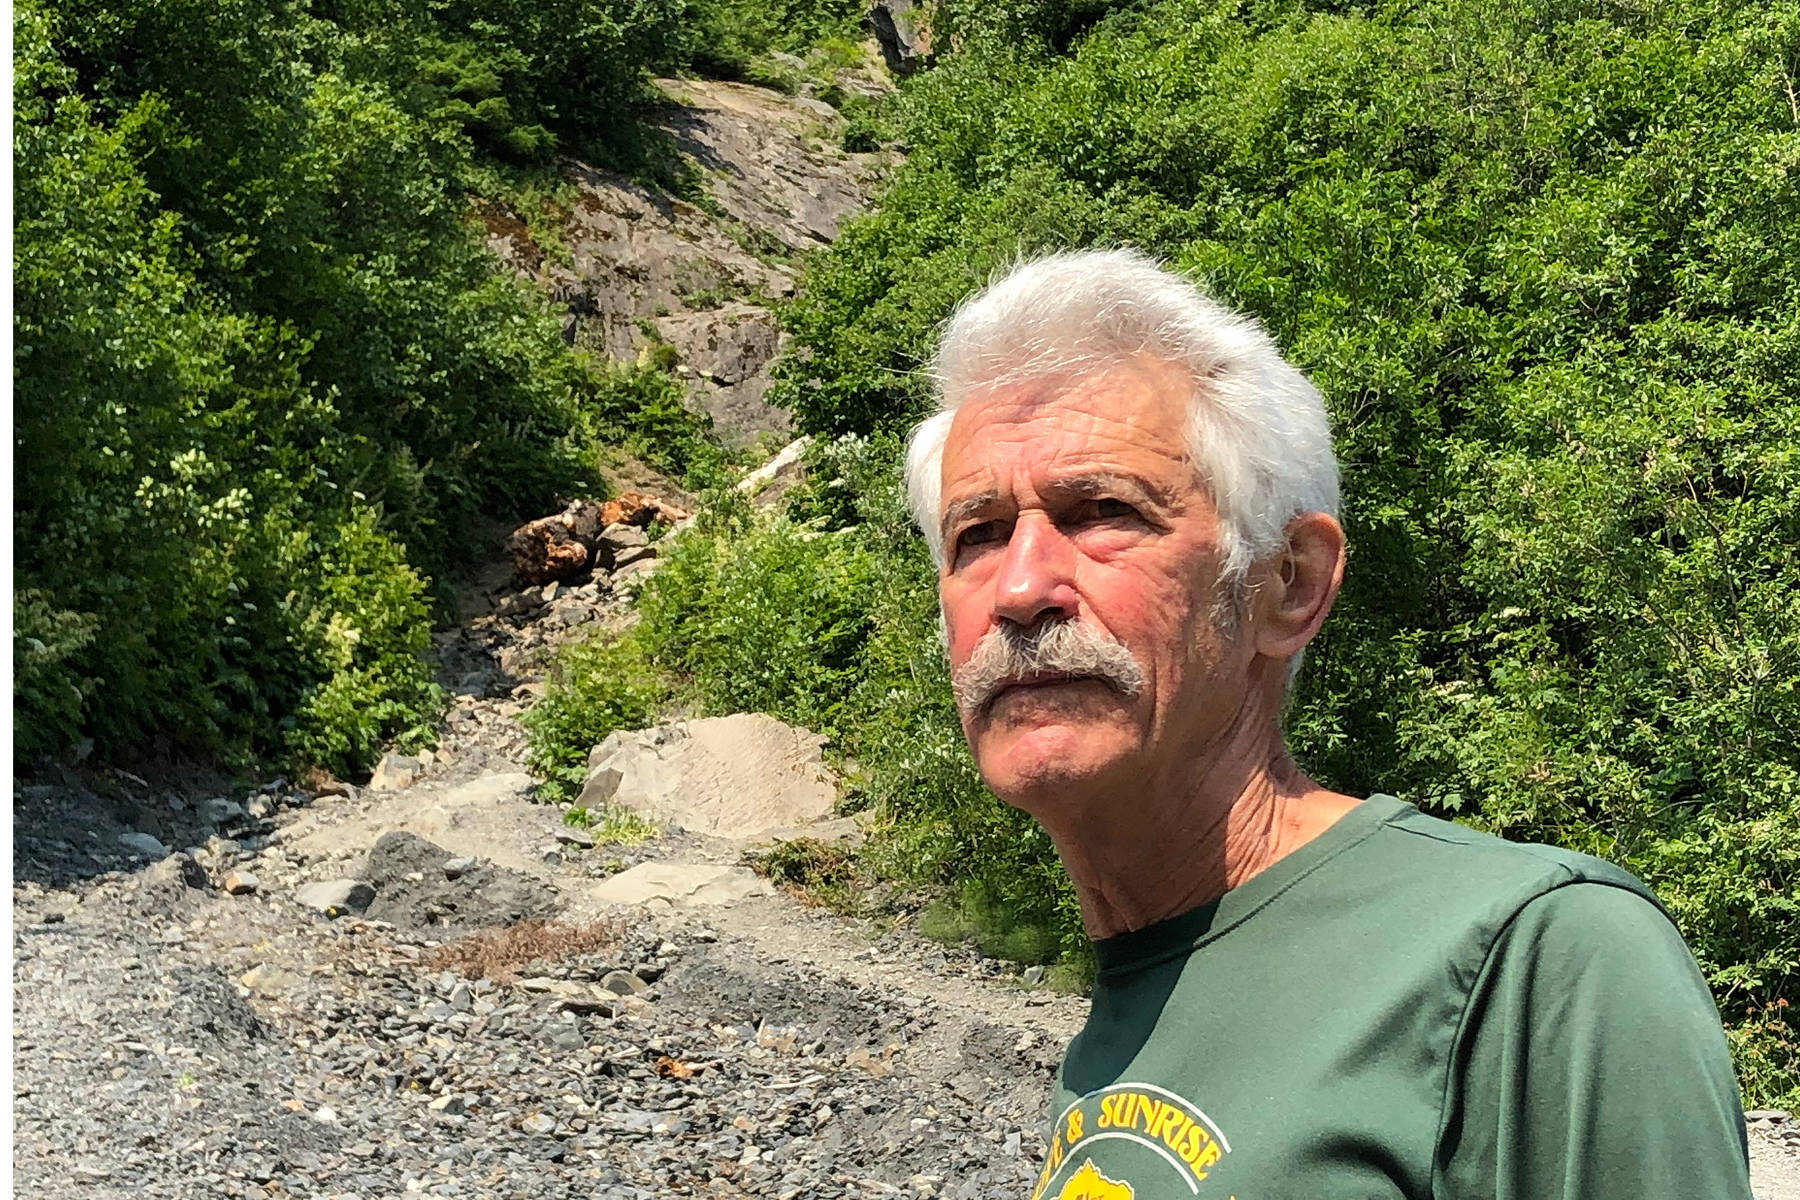 Seward’s Fred Moore stands at the base of Mount Marathon in Seward, Alaska, on Monday, June 24, 2019. Moore will run in his 50th consecutive Mount Marathon race on July 4. (Photo by Joey Klecka/Peninsula Clarion)